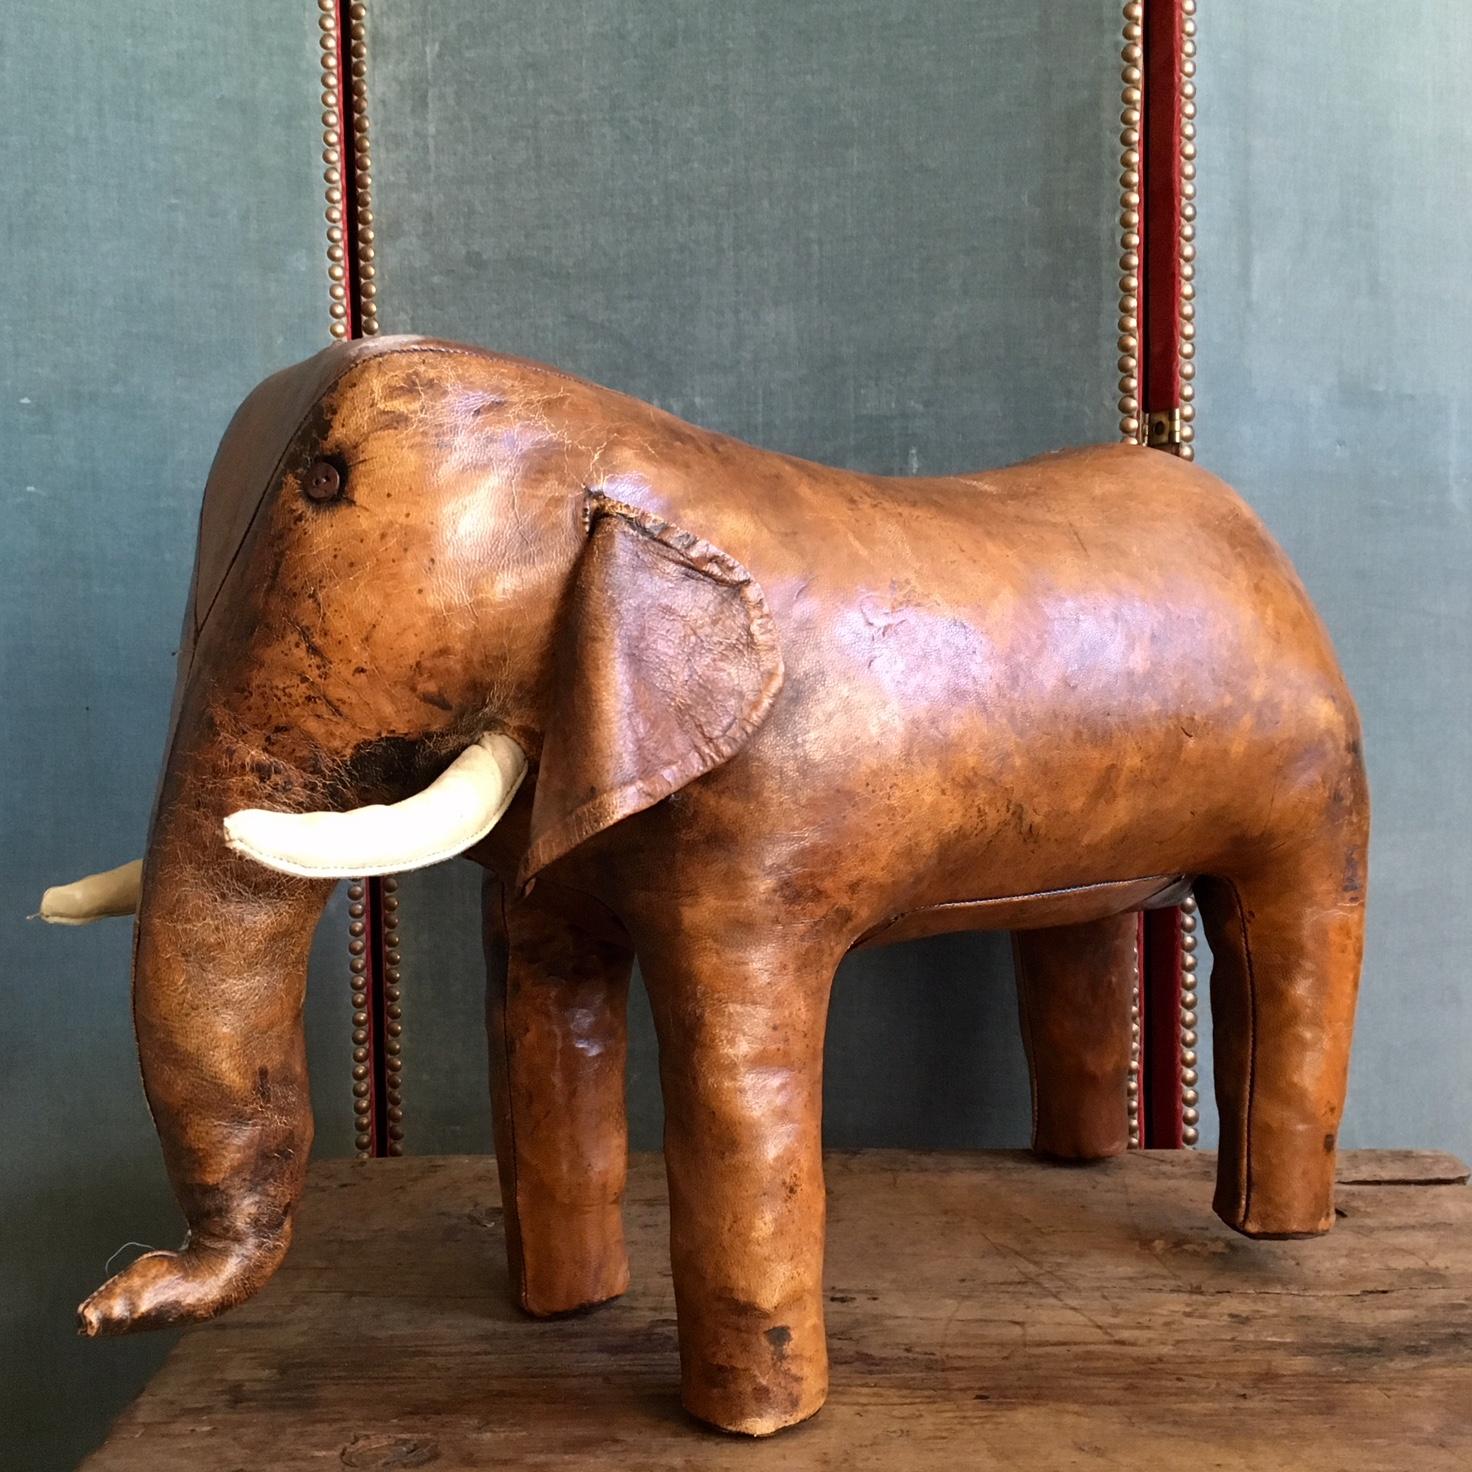 Abercrombie & Fitch vintage leather footstool in the shape of an elephant. This footstool was made in the 60s and the design is by Dimitri Omersa. A special collector's item. The leather shows traces of aging, such as discoloration and small cracks,